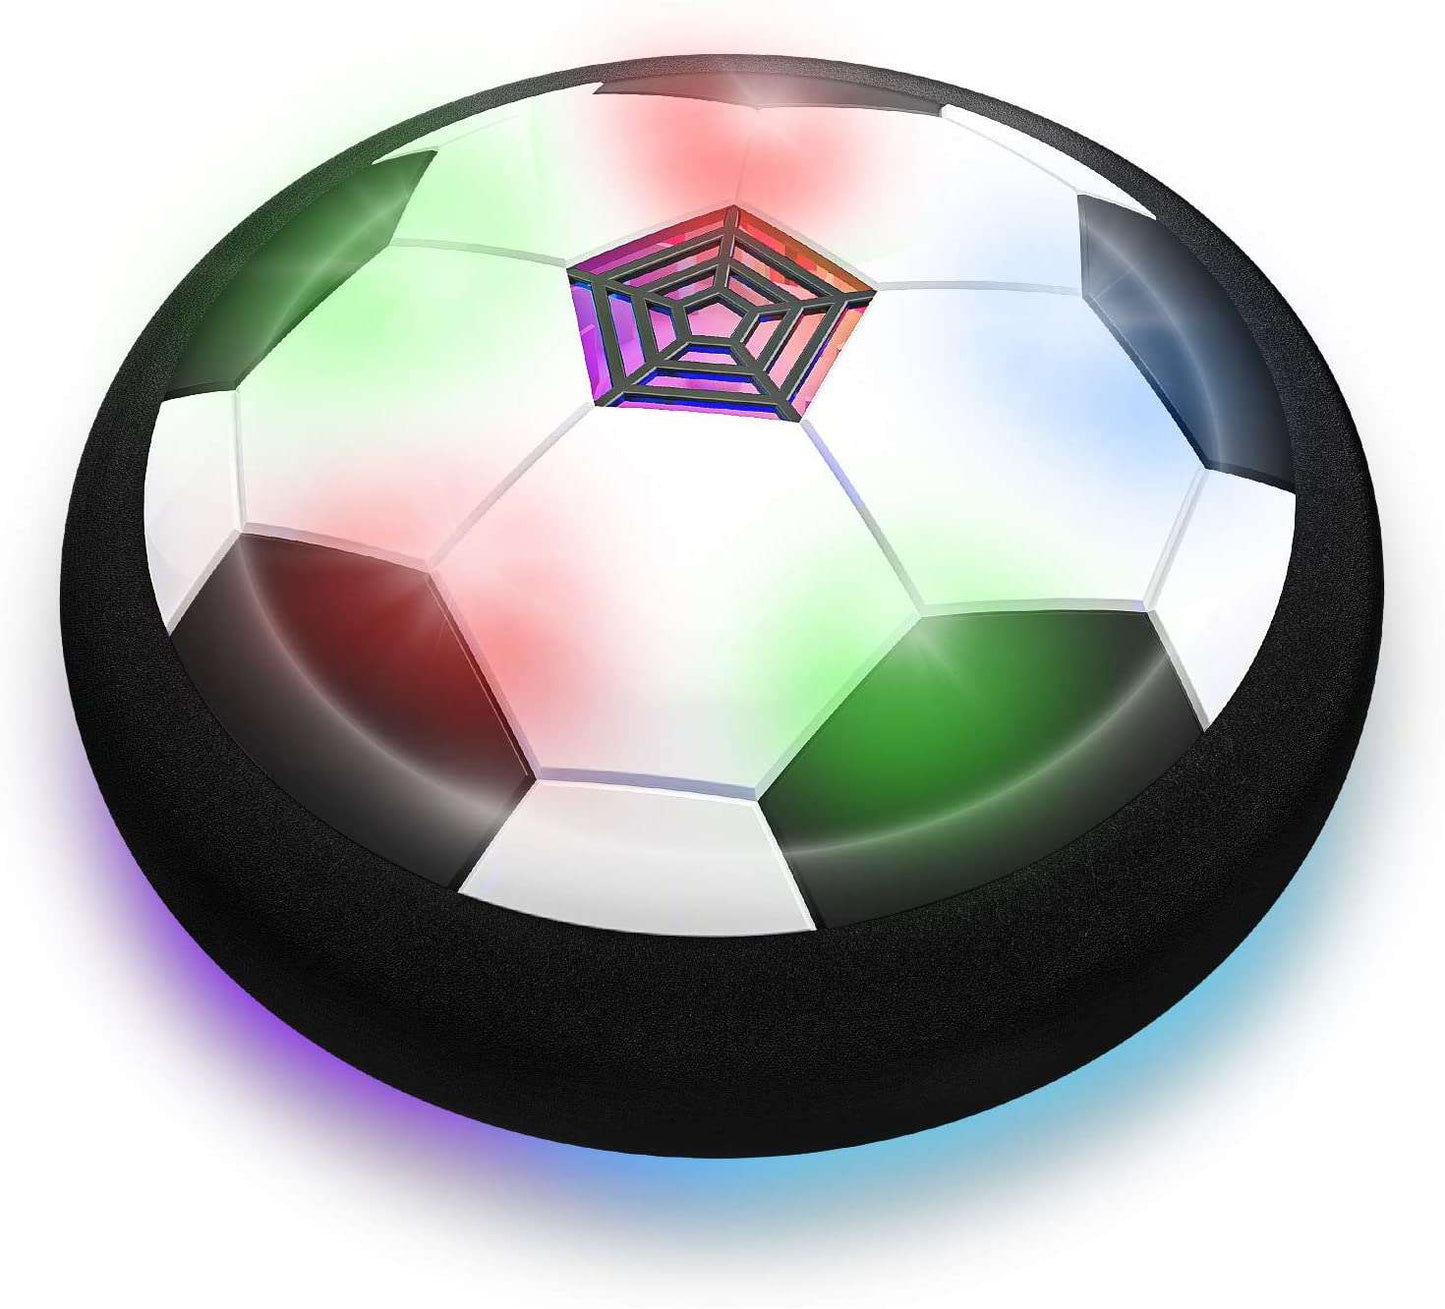 AZi® Boy Toys - LED Hover Soccer Ball - Air Power Training Ball Playing Football Game - Soccer (Multicolor)